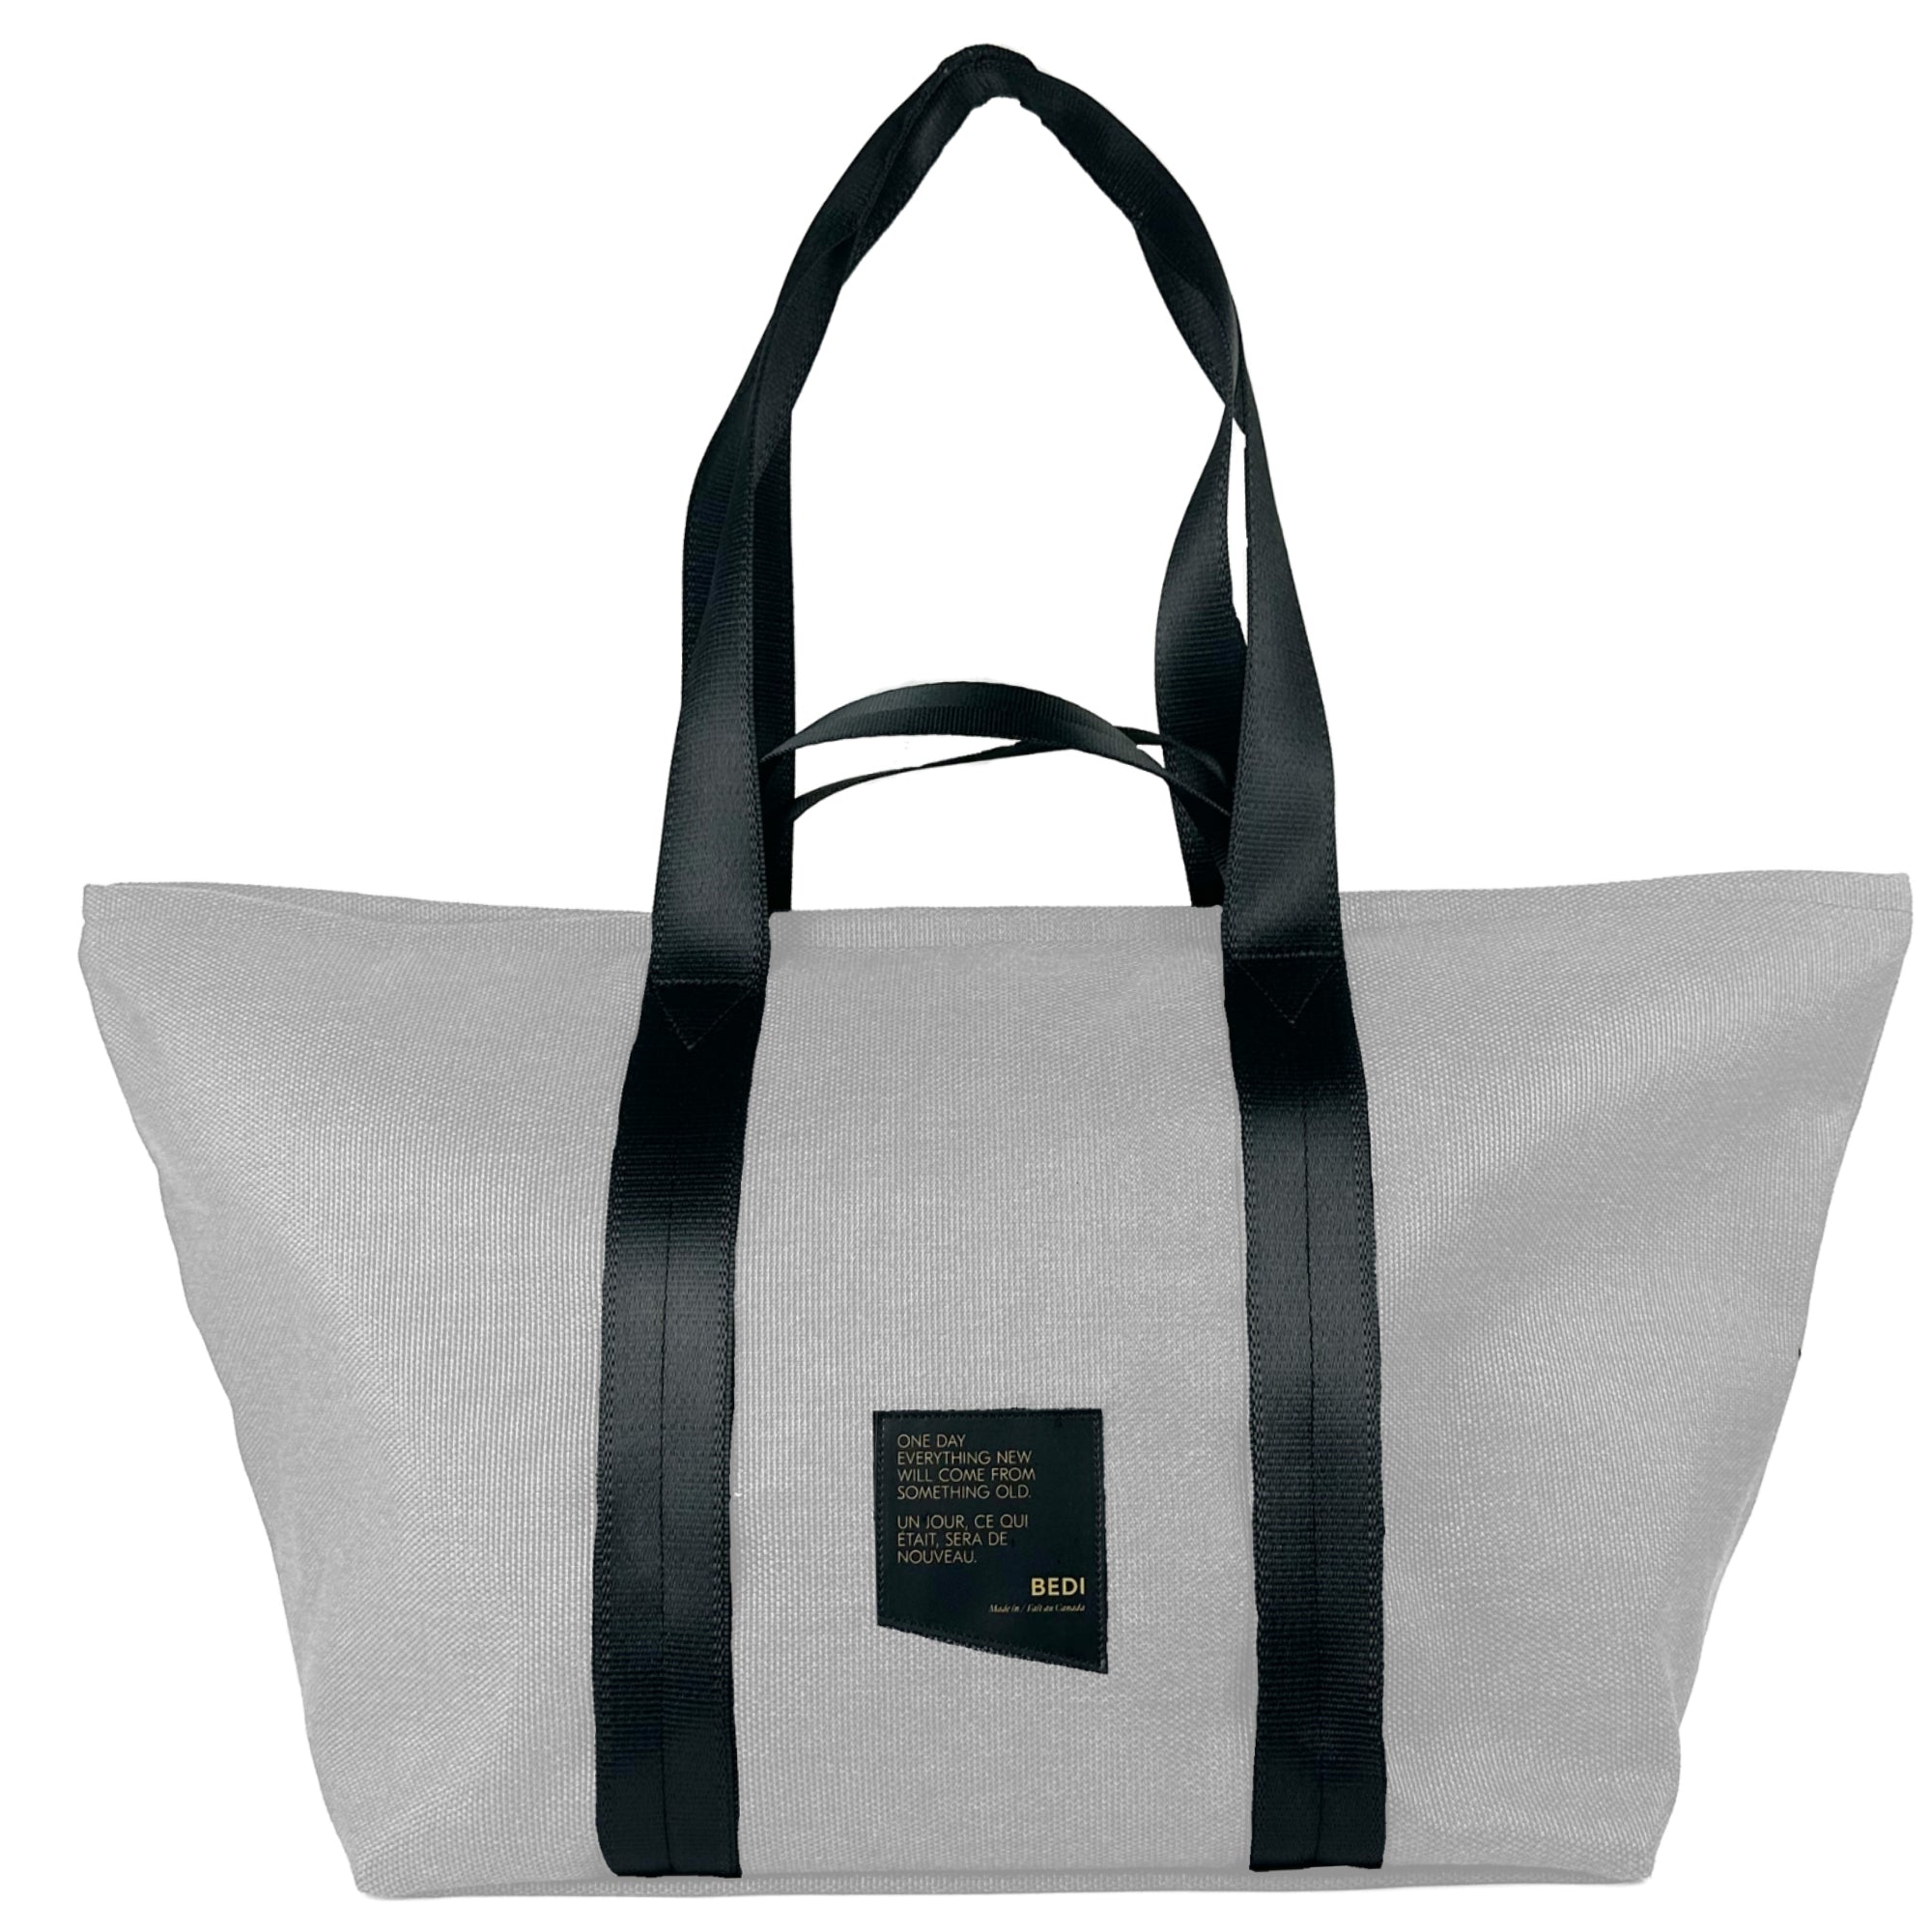 front view of a duffle bag in white twill material, against a white background.